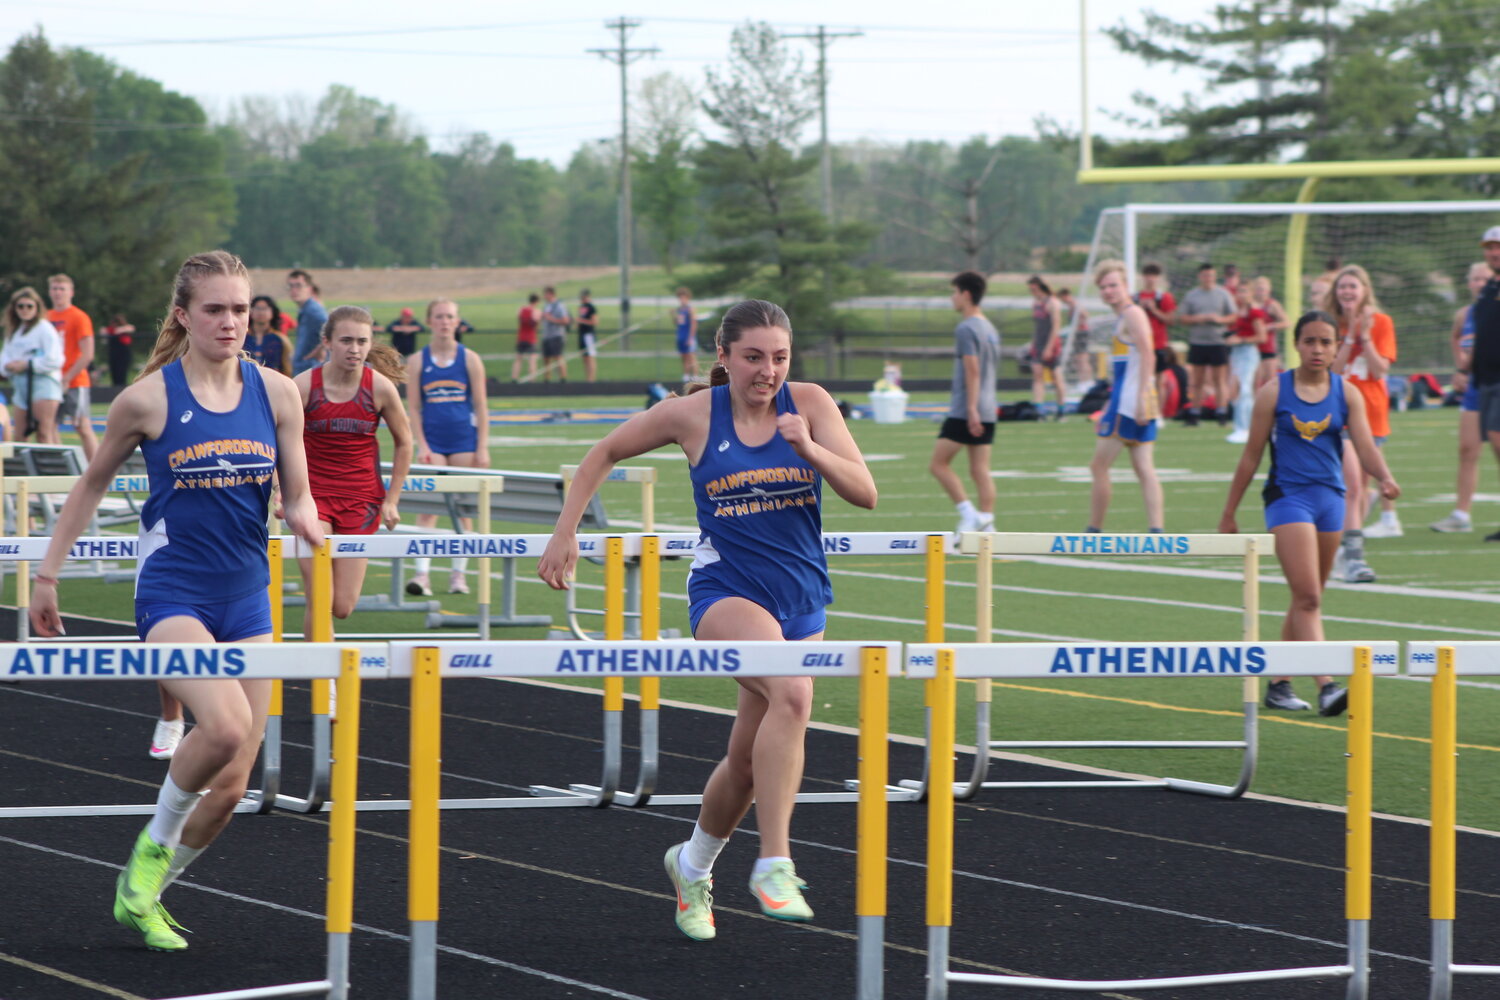 Crawfordsville's Guinevere Schmitzer-Torbert and Aubrey Lowe went 1-2 for the Athenian girls in the 110 hurdles.